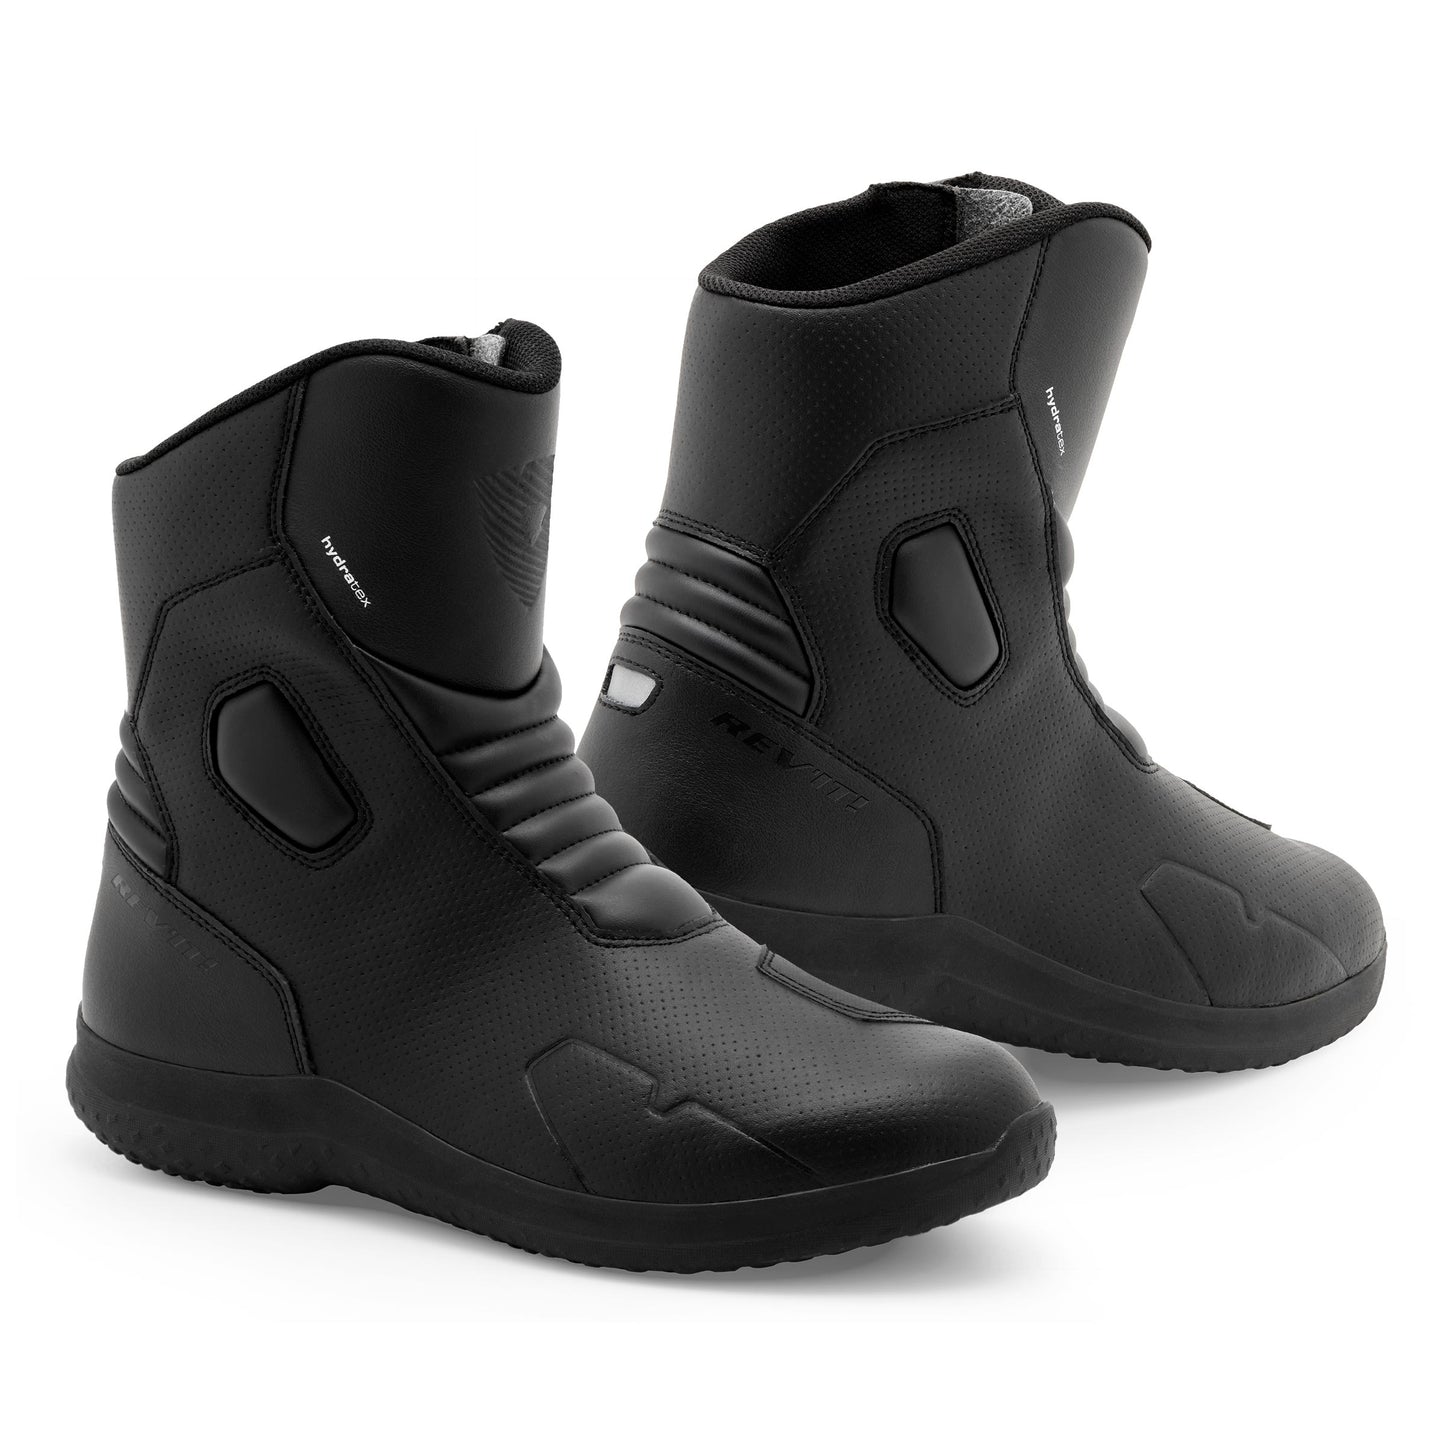 REV'IT! Fuse H2O Boots